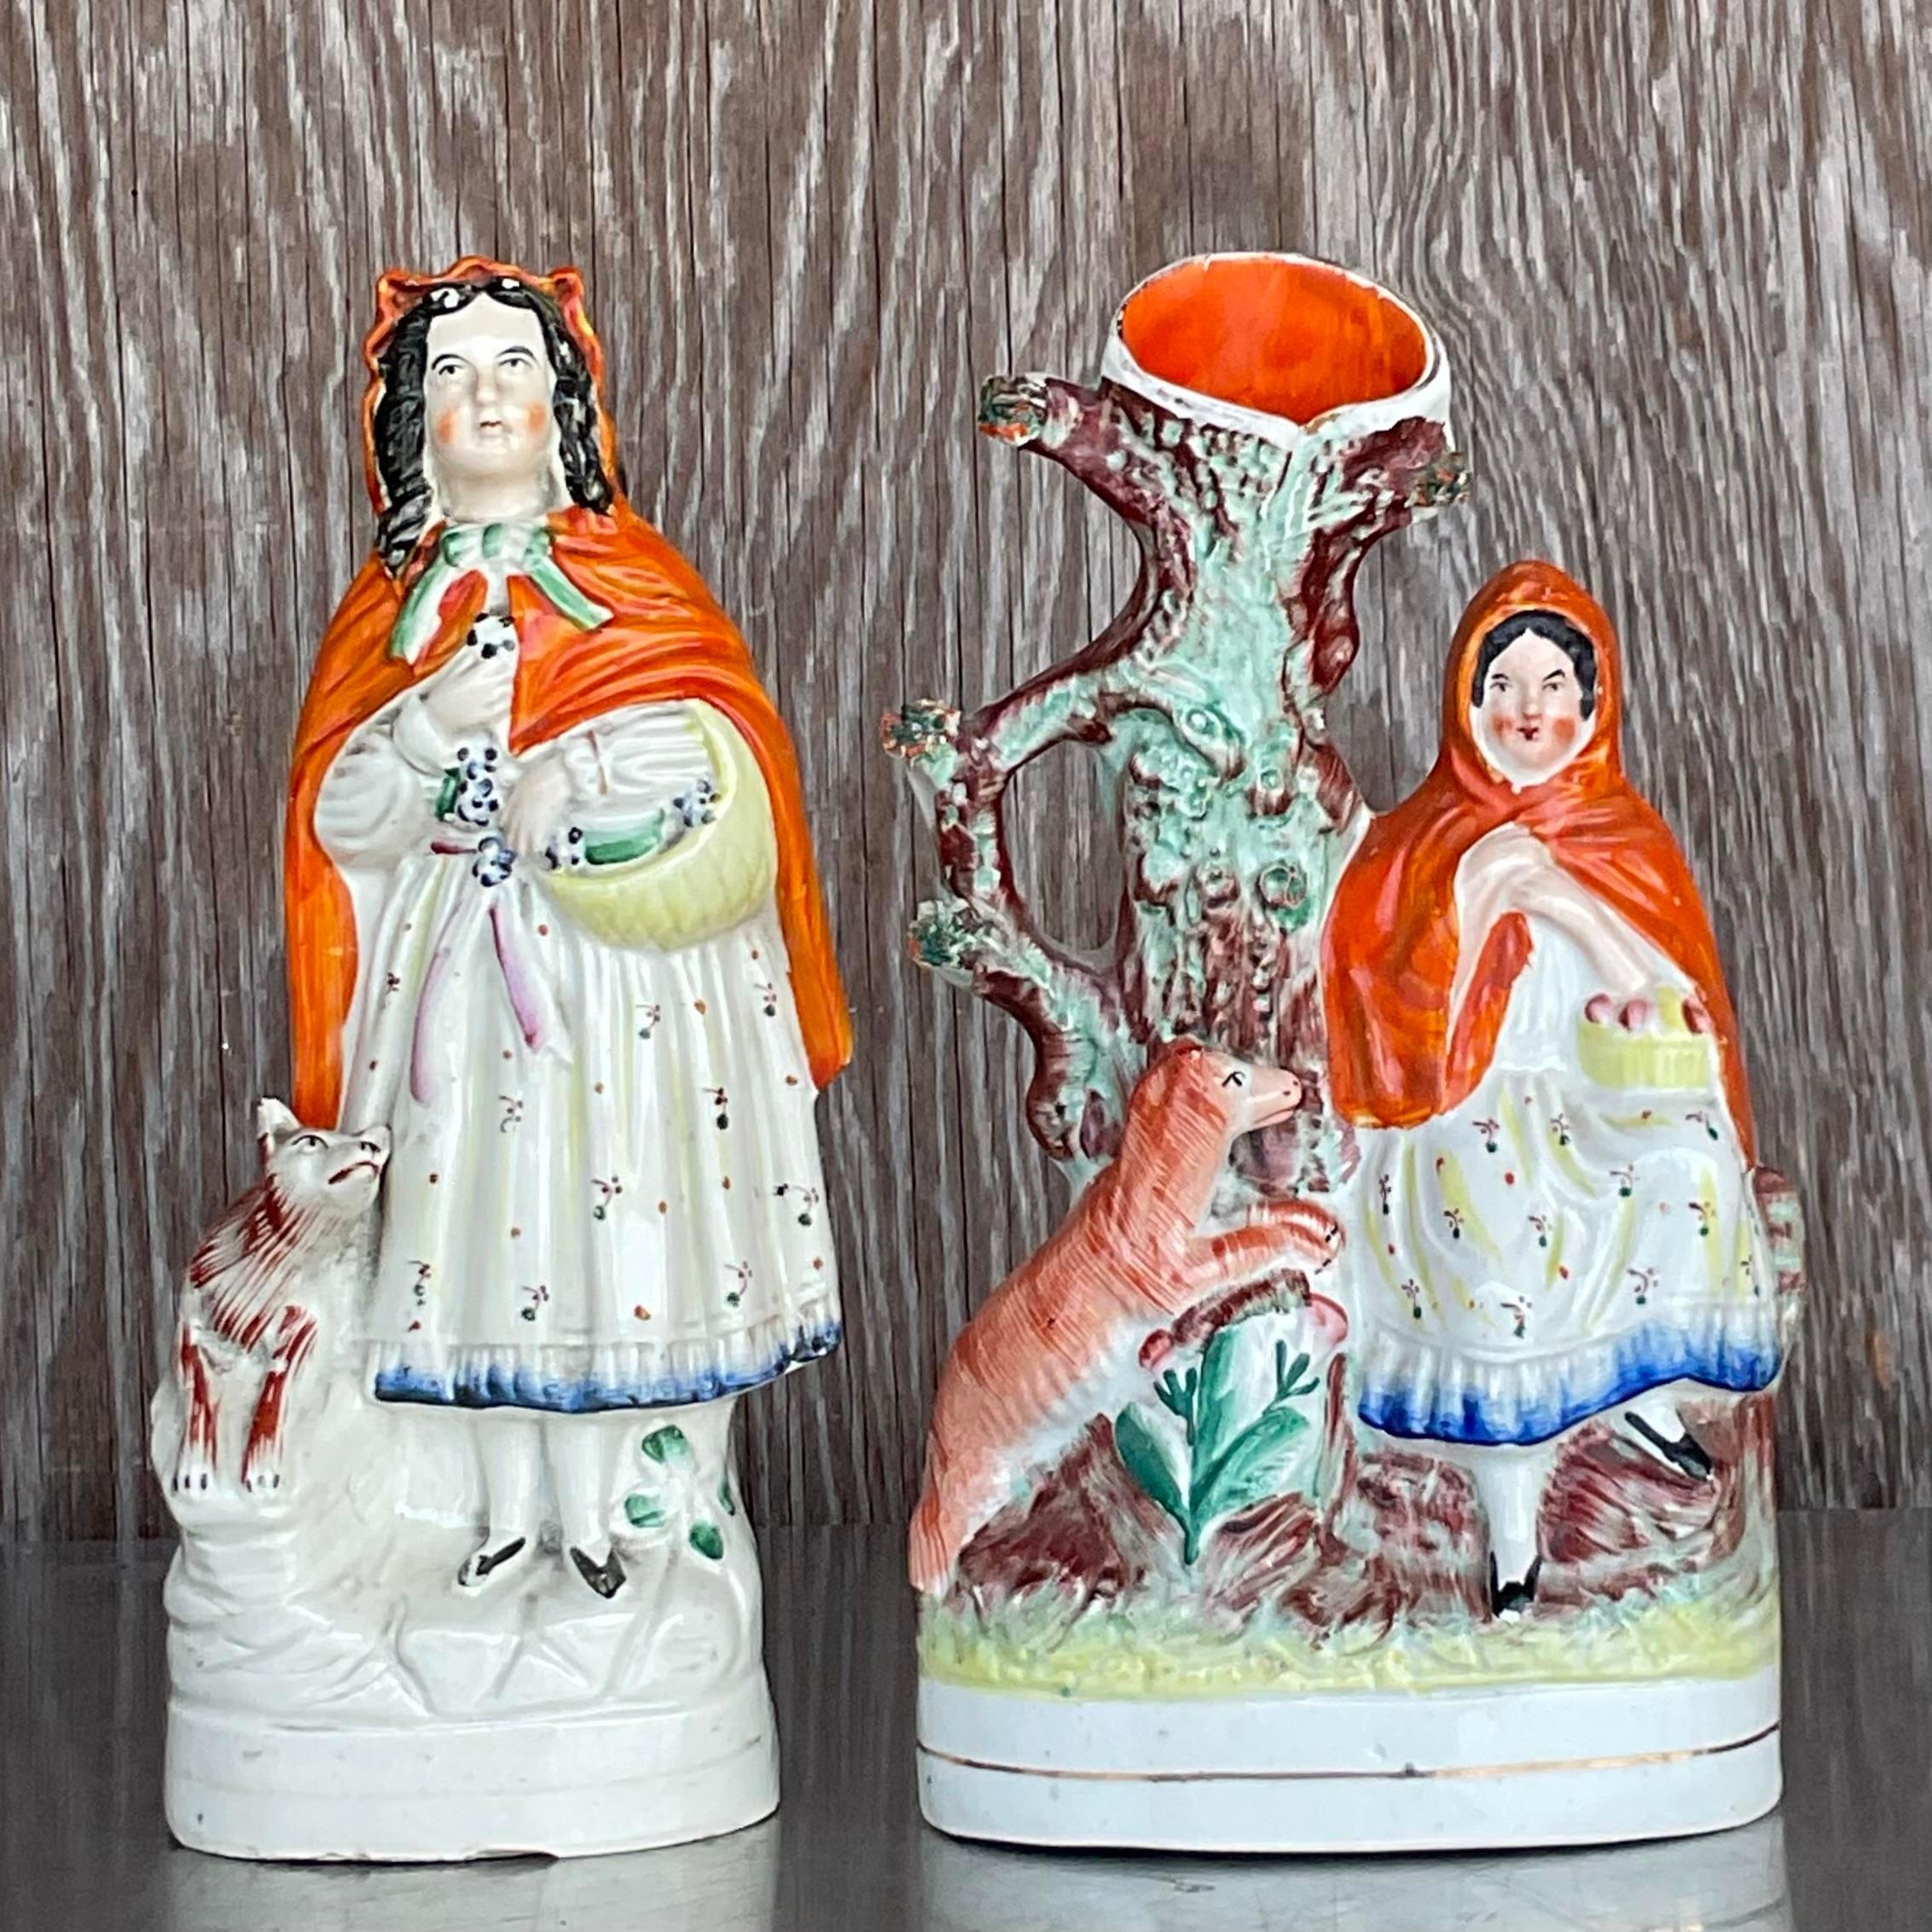 Vintage Regency Staffordshire Style Figurines - Set of 2 In Good Condition For Sale In west palm beach, FL